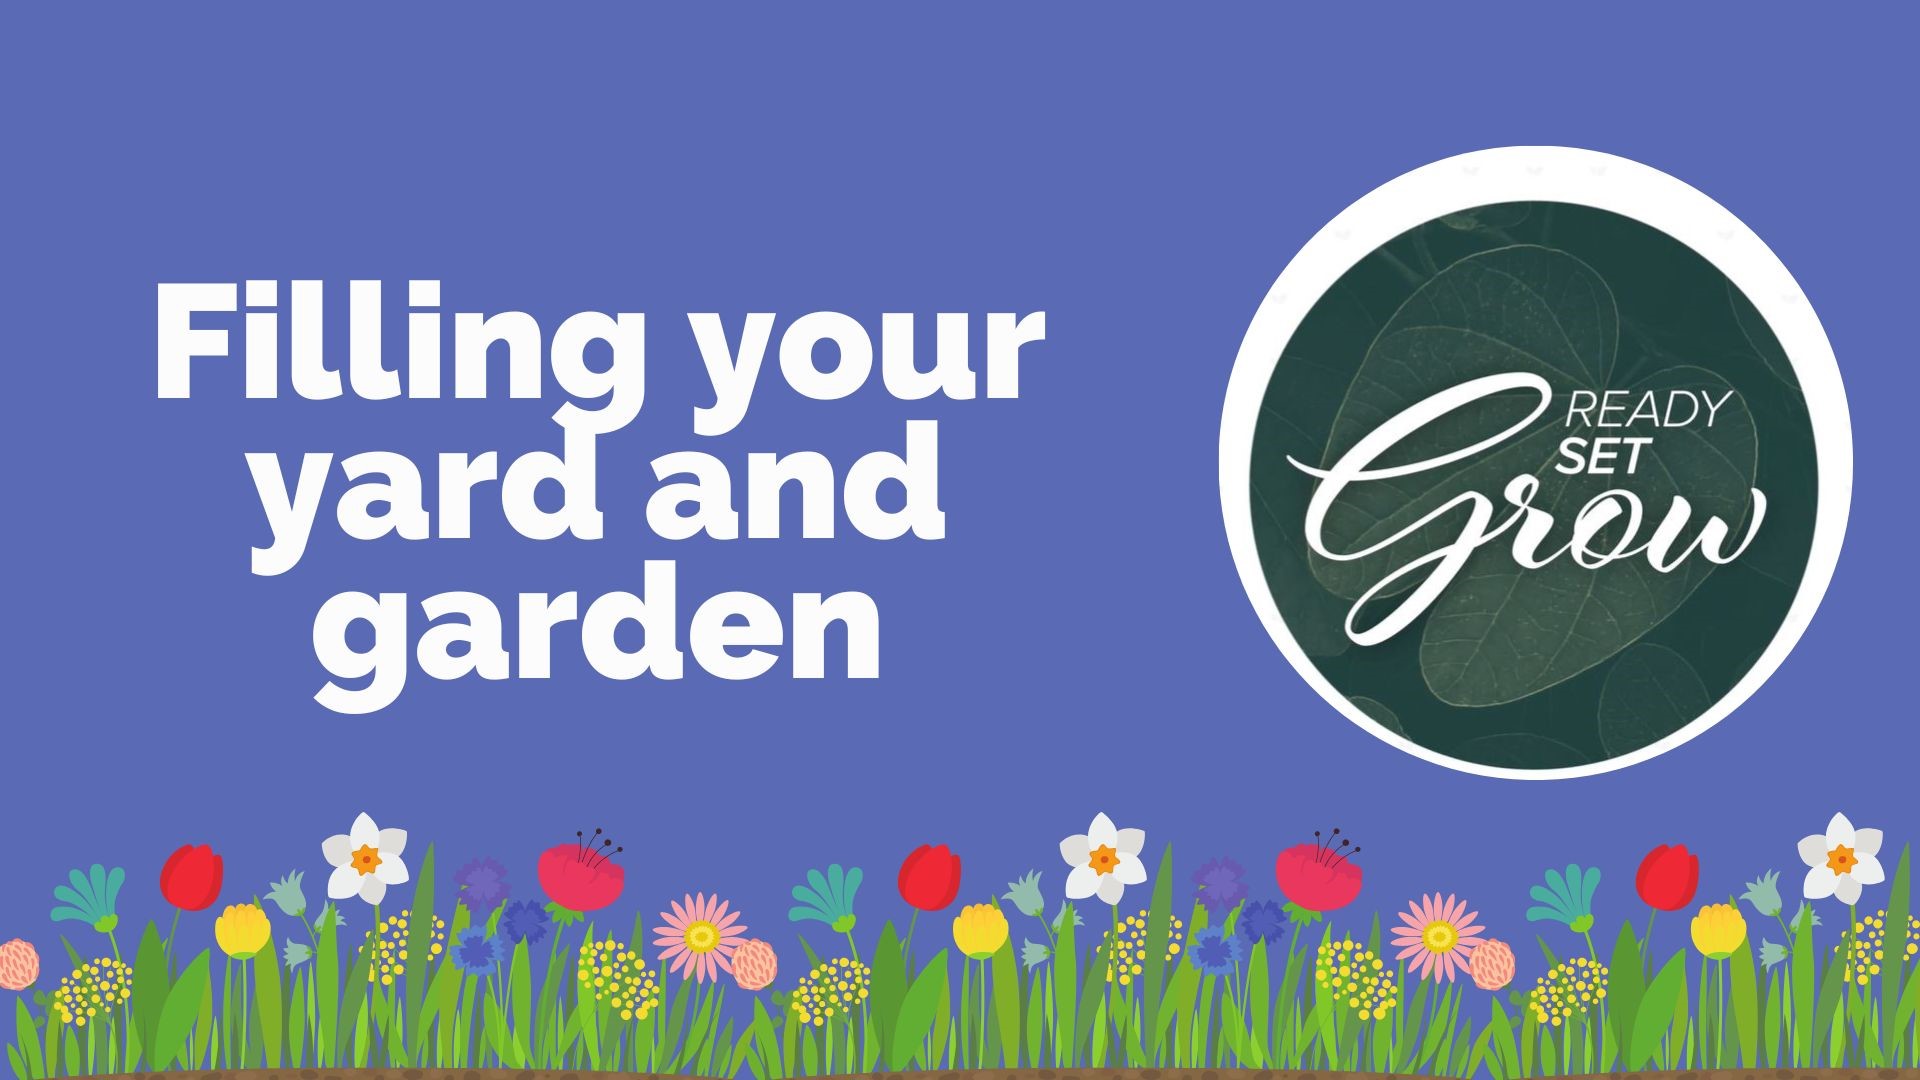 It is the middle of May and we are looking at ways you can fill out your yard and garden. Plus tips on handling mosquitoes and container planting.